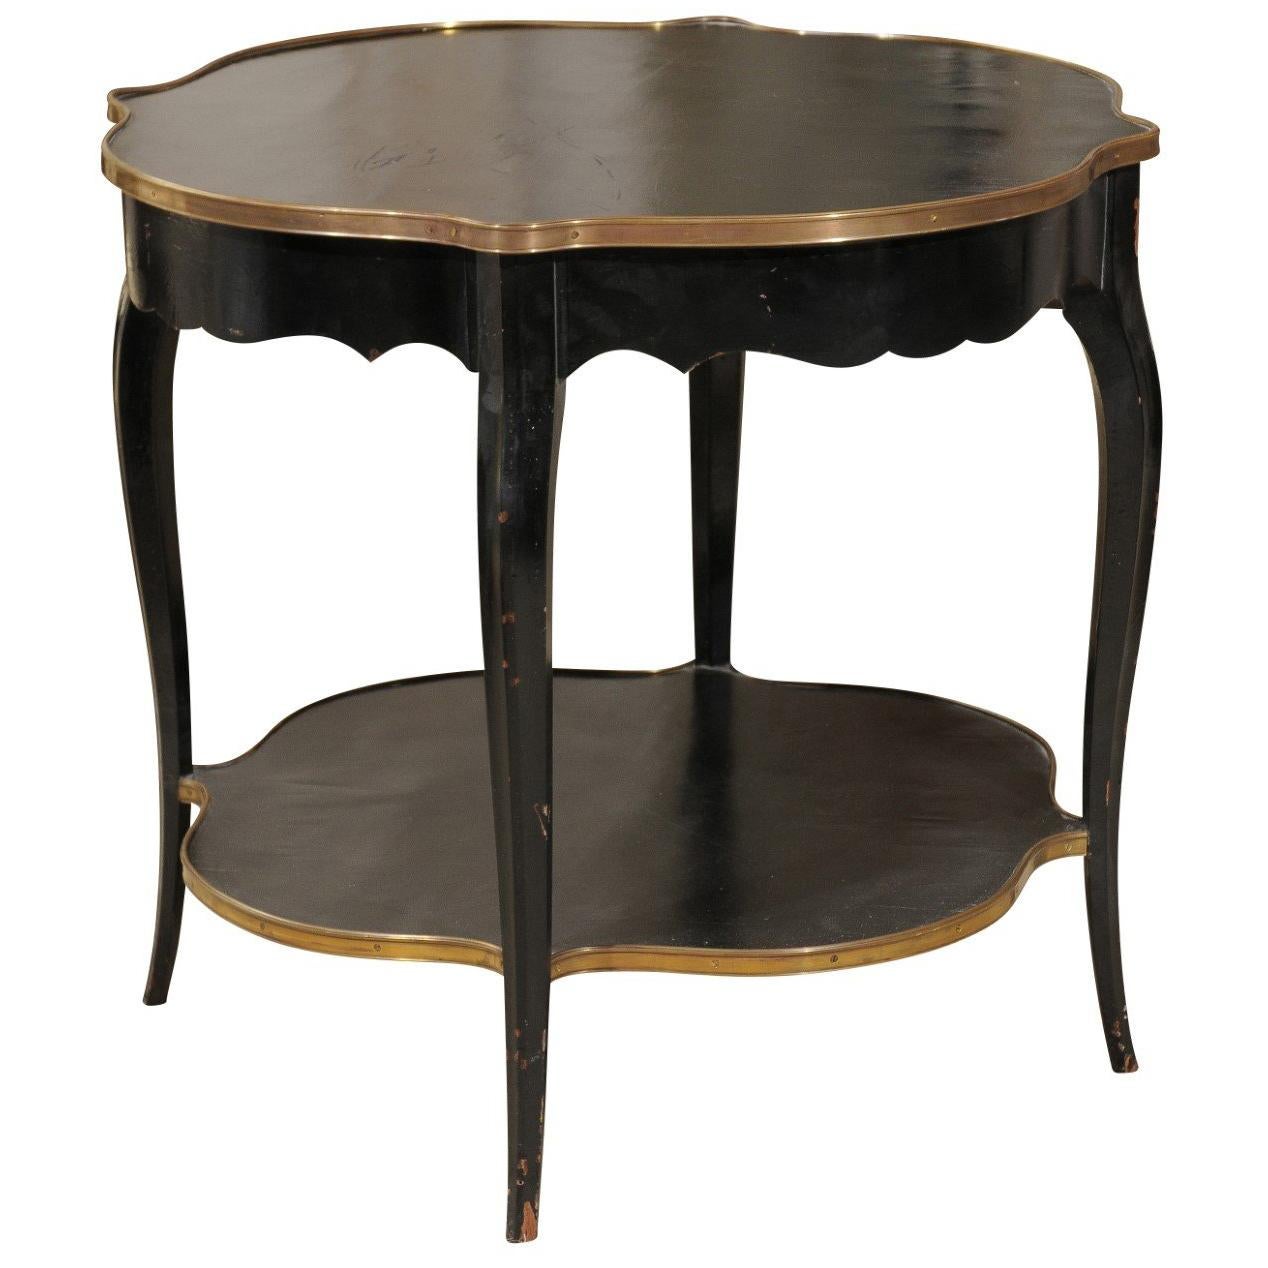 1920s Napoleon III Style Quatrefoil Black-Painted Accent Table with Gilt Accents